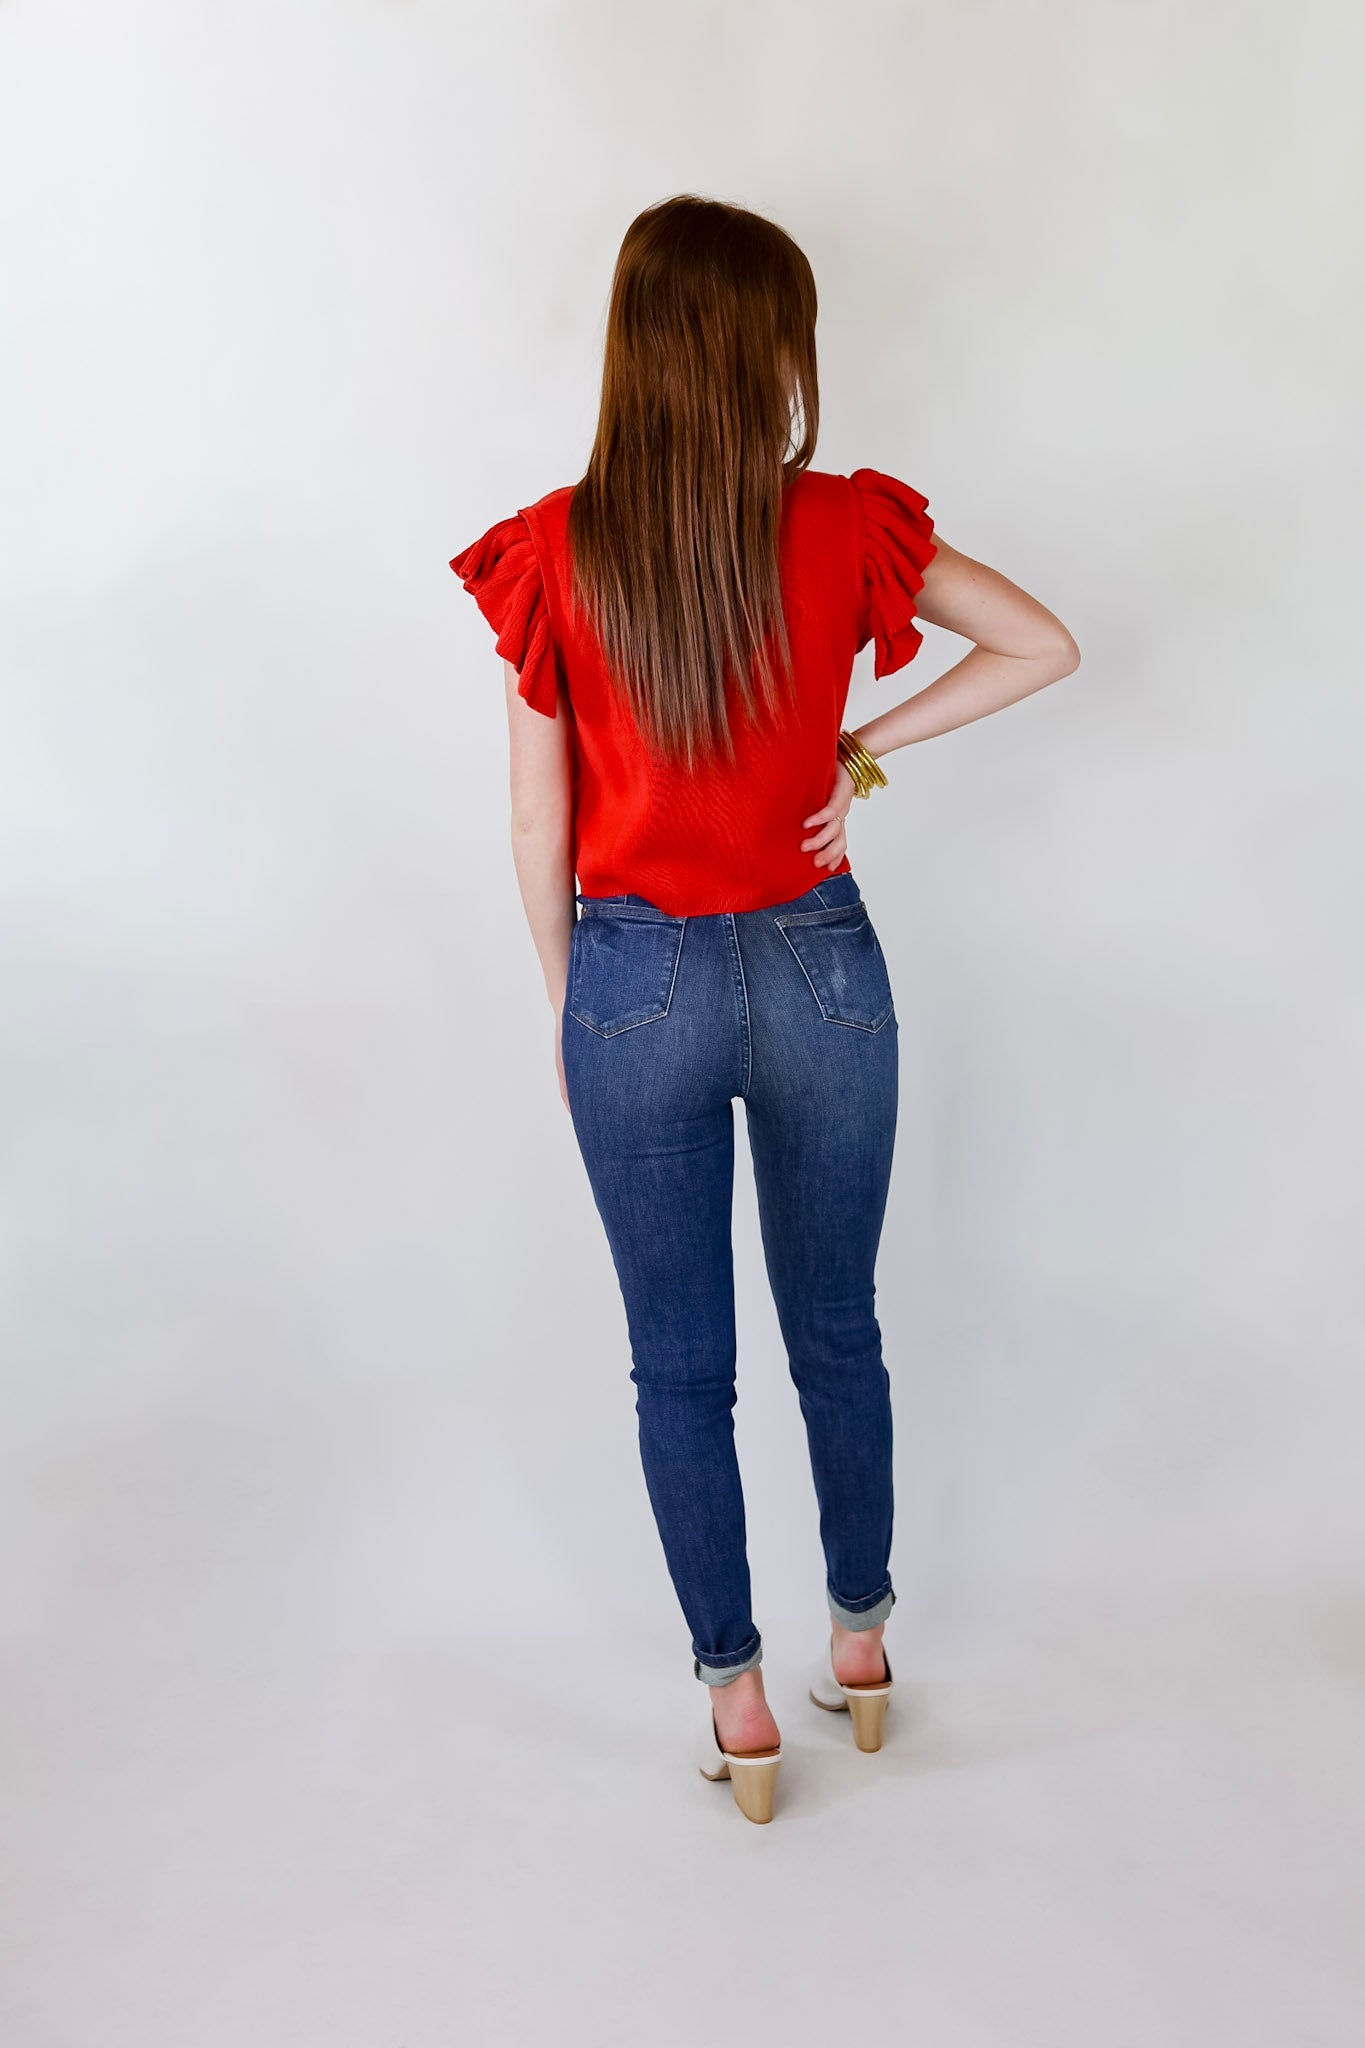 Talk This Way Cheetah Print Sweater Top with Ruffle Cap Sleeves in Red - Giddy Up Glamour Boutique